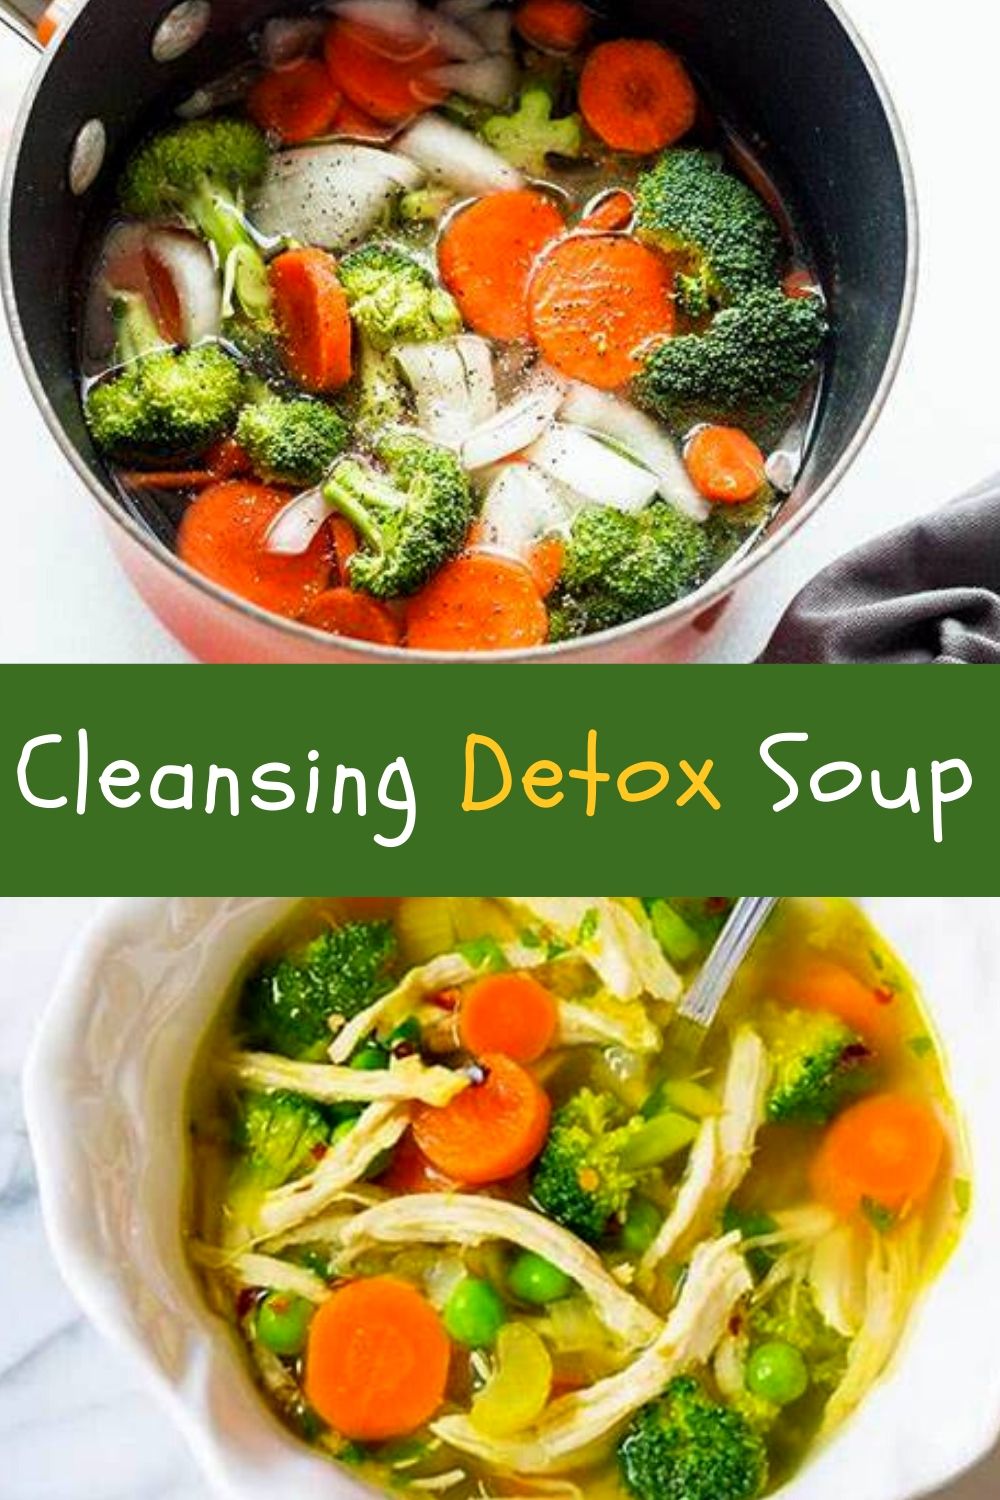 Cleansing Detox Soup | New Recipe 4